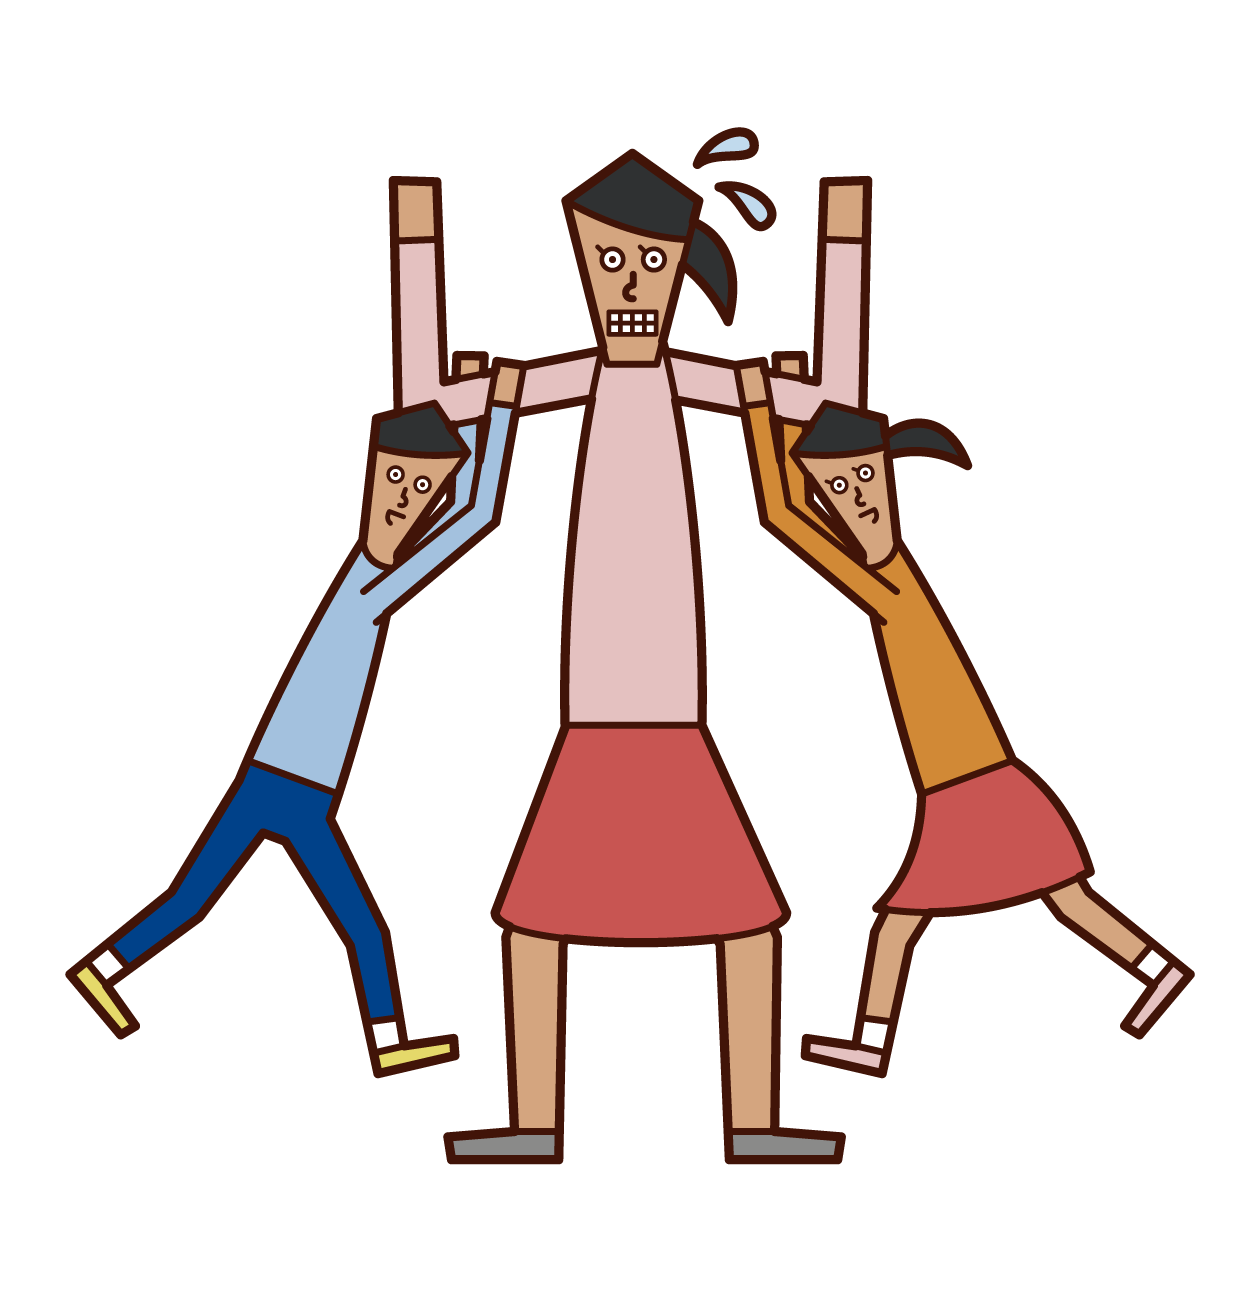 Illustration of a woman playing with children